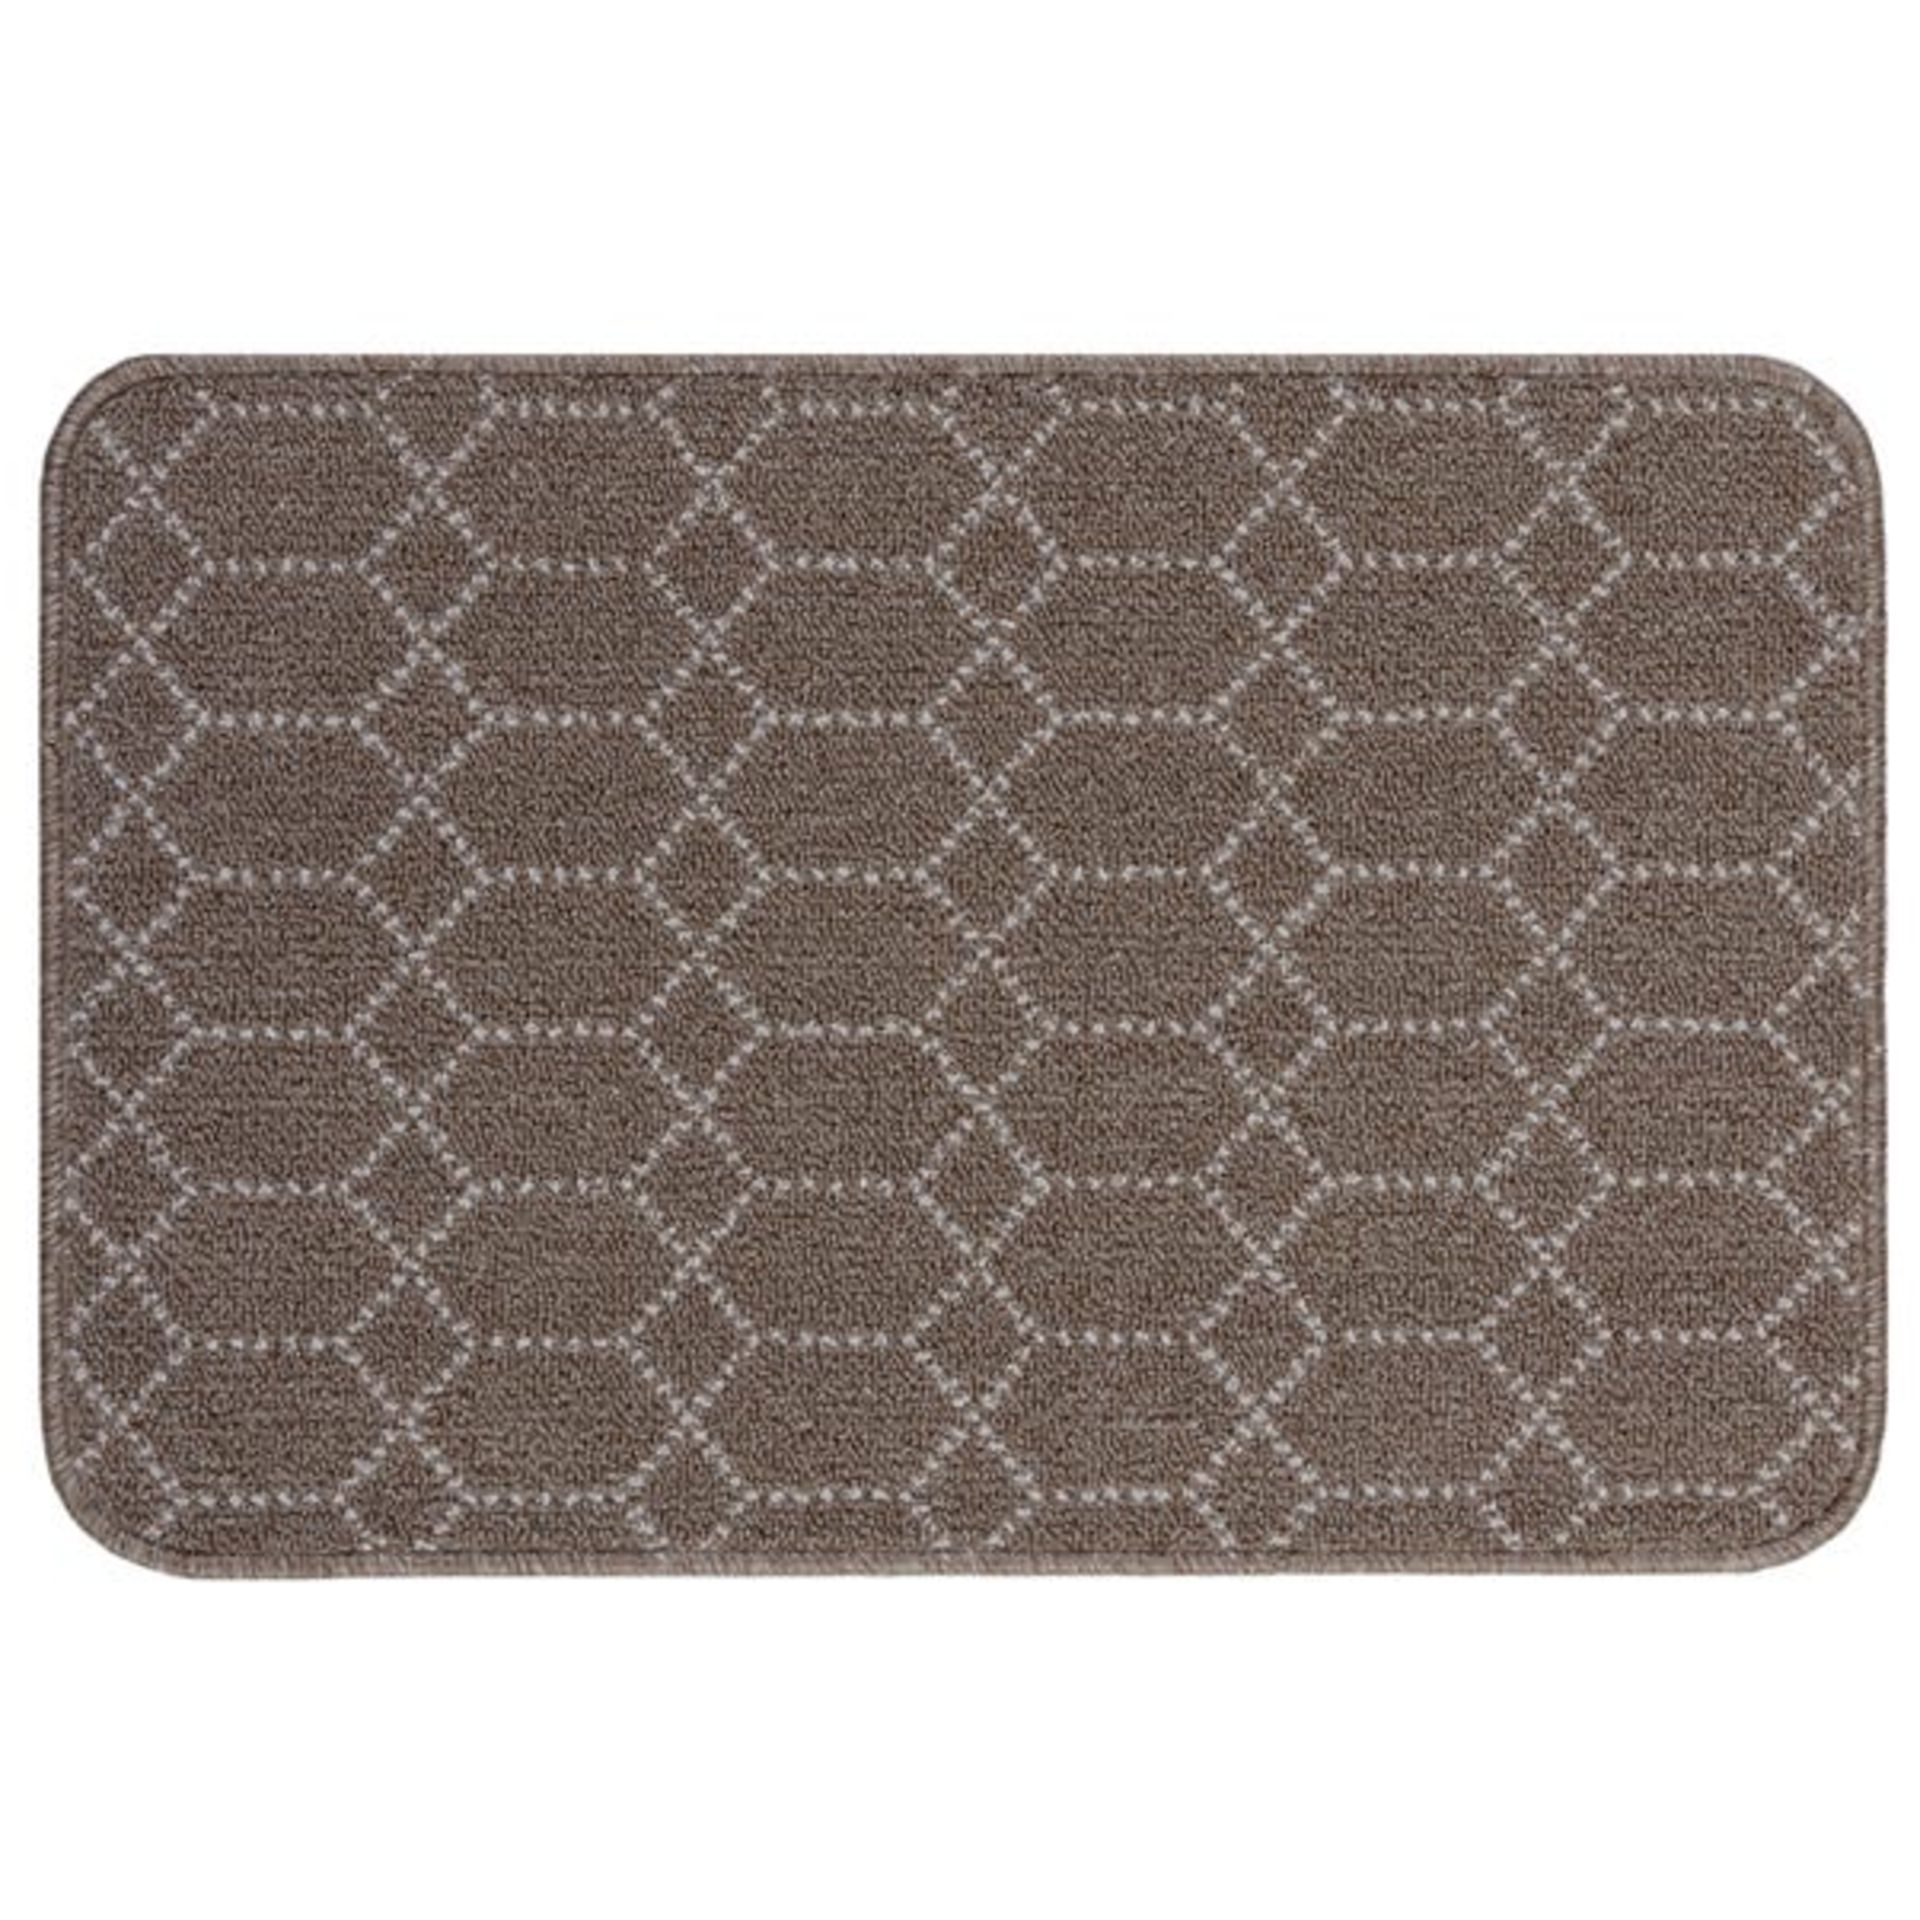 Skyline D040 Rug Orion Washable Natural Rectangle 50X75cm RRP 12 About the Product(s) Skyline D040 - Image 2 of 3